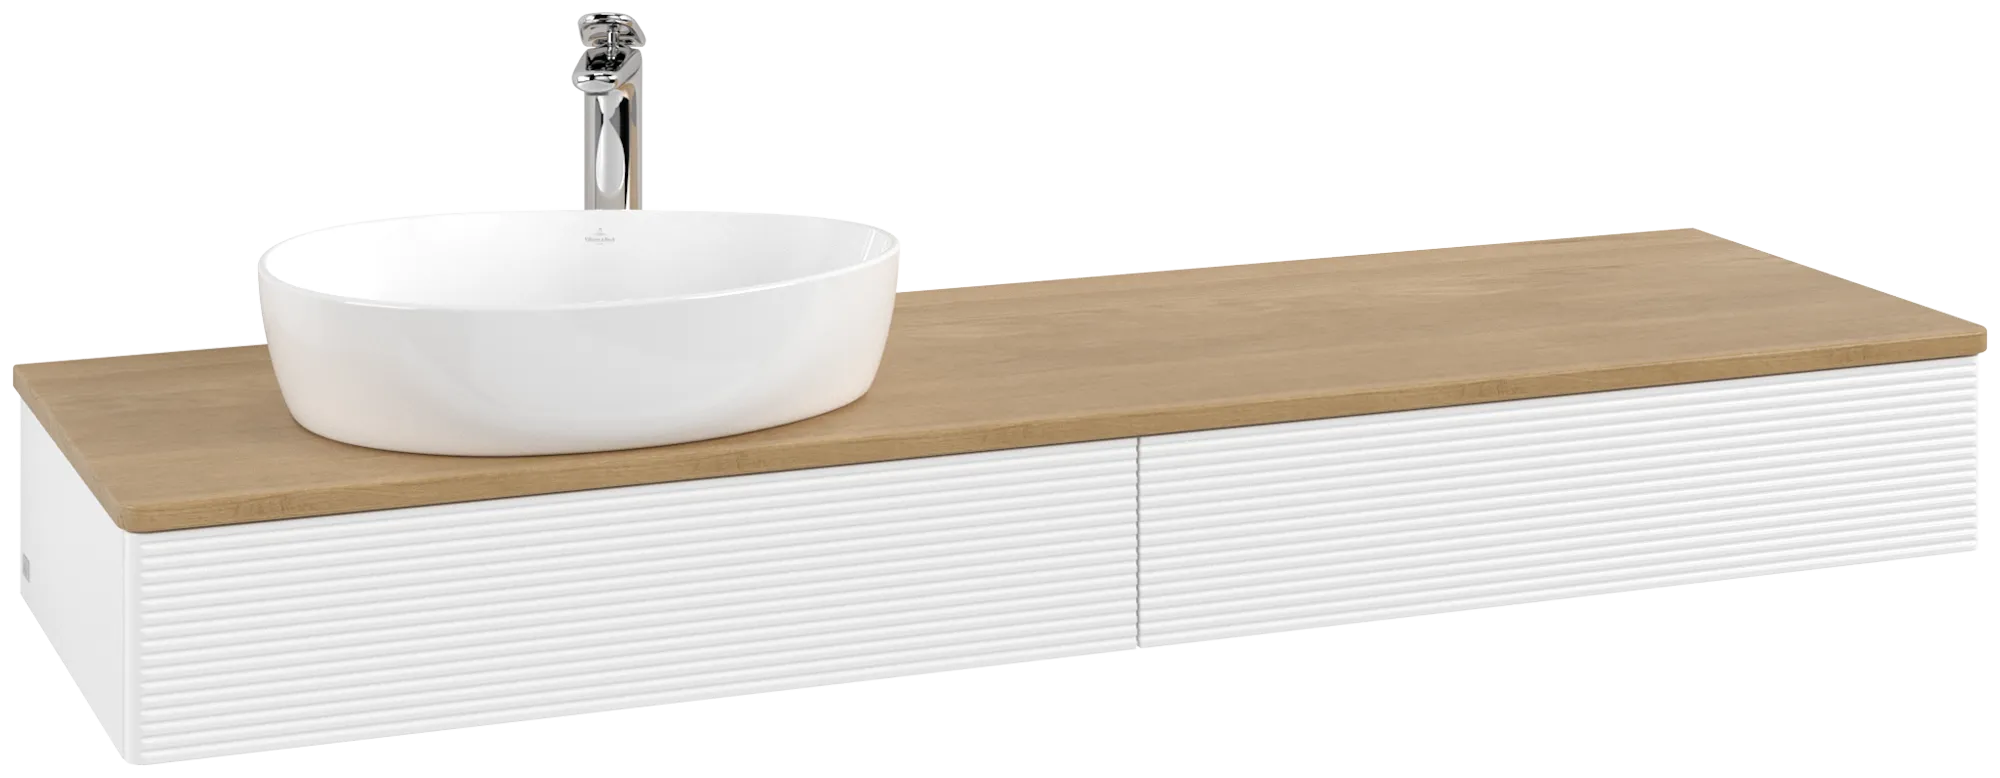 Picture of VILLEROY BOCH Antao Vanity unit, with lighting, 2 pull-out compartments, 1600 x 190 x 500 mm, Front with grain texture, White Matt Lacquer / Honey Oak #L15151MT